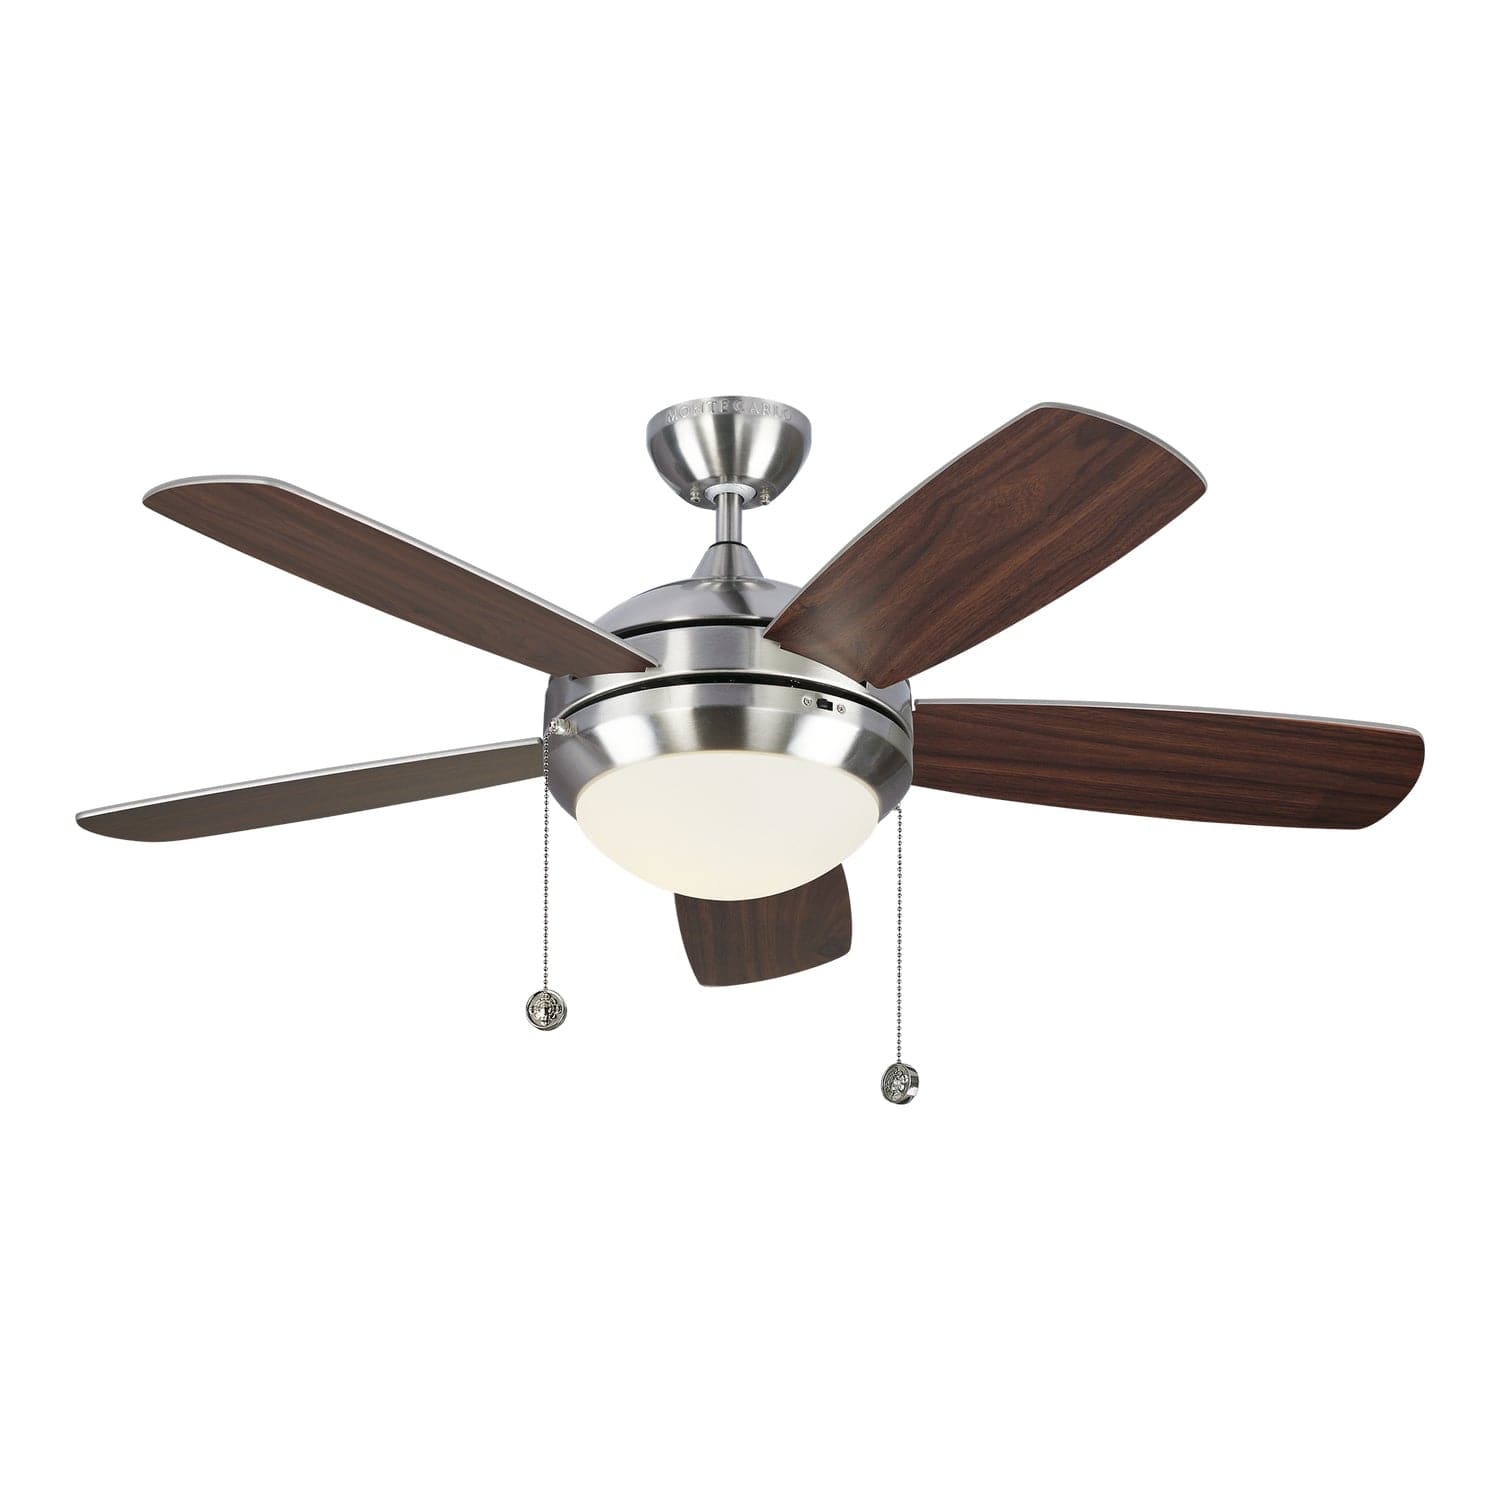 Generation Lighting. - 5DIC44BSD-V1 - 44``Ceiling Fan - Discus Classic 44 - Brushed Steel